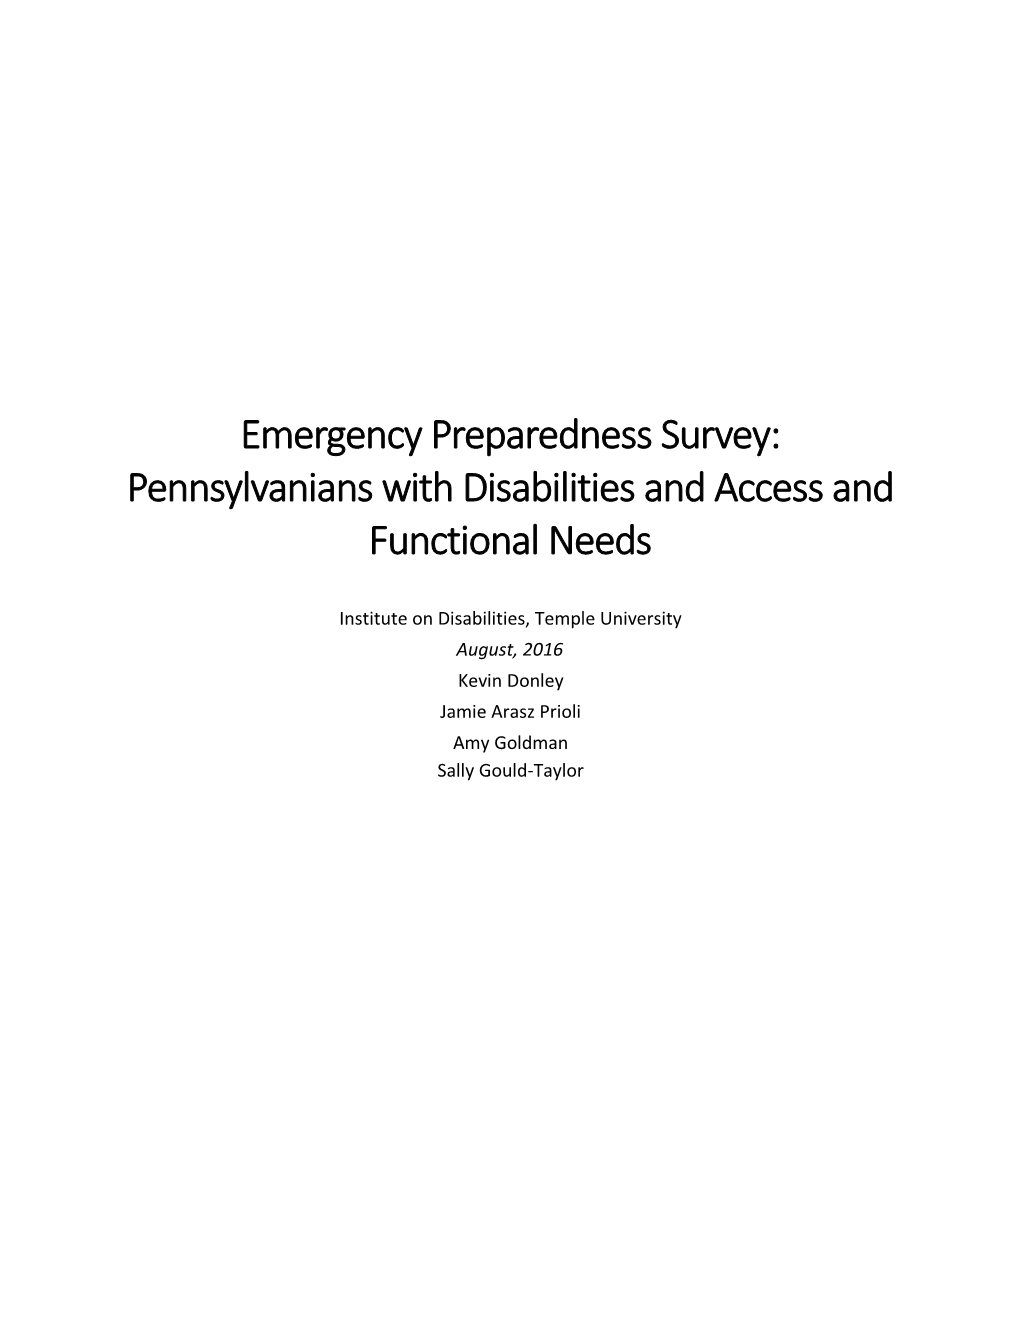 Emergency Preparedness Survey: Pennsylvanians with Disabilities and Access and Functional Needs